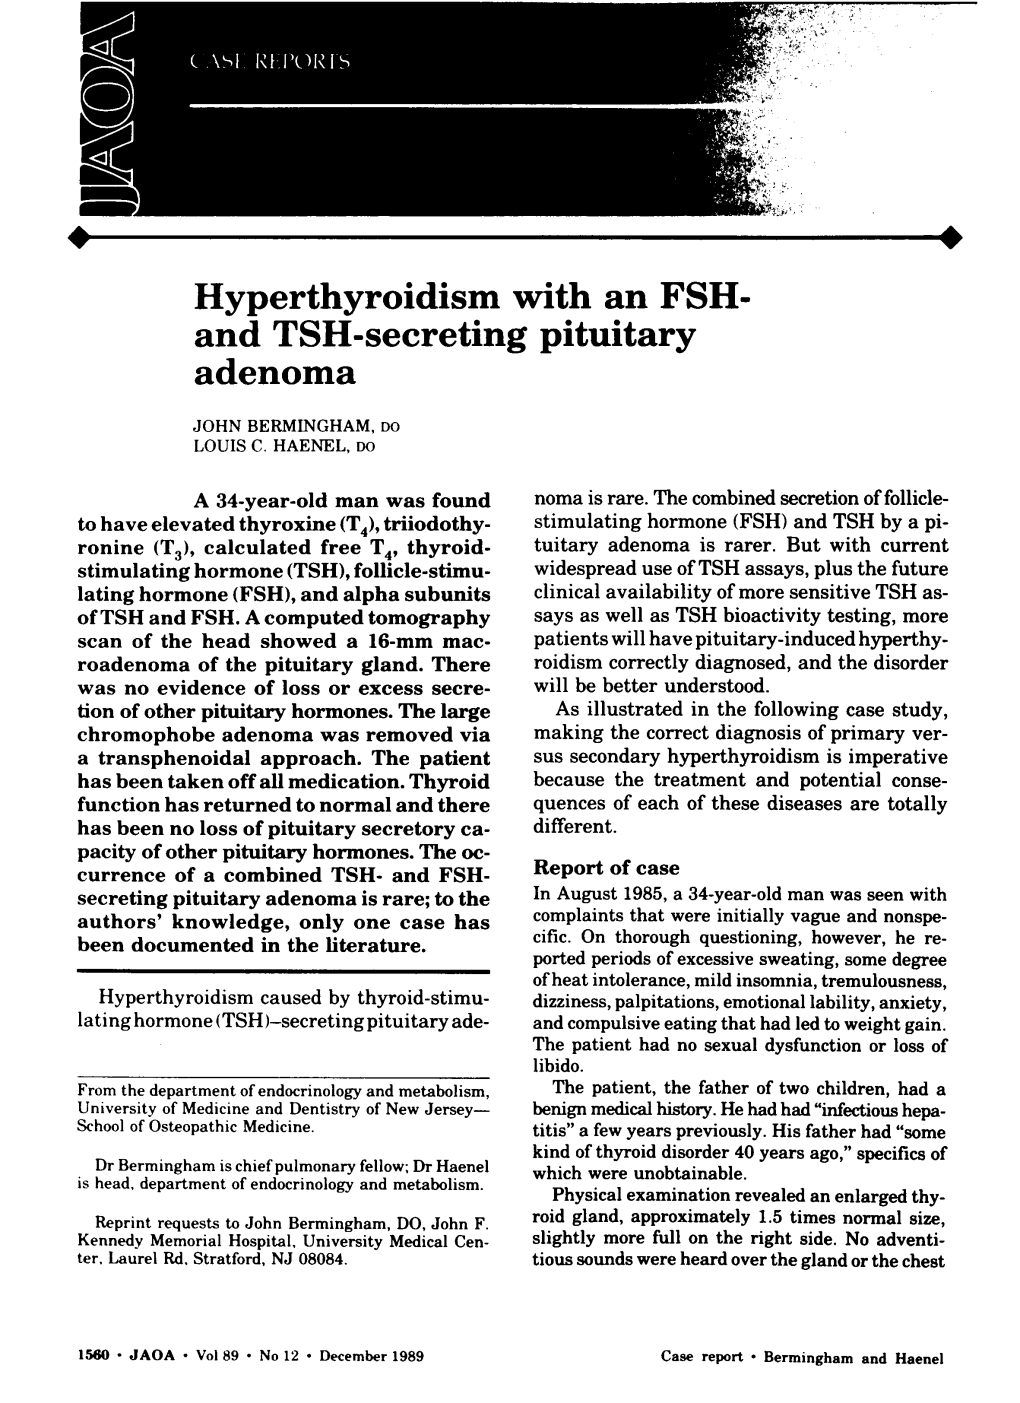 Hyperthyroidism with an FSH- and TSH-Secreting Pituitary Adenoma